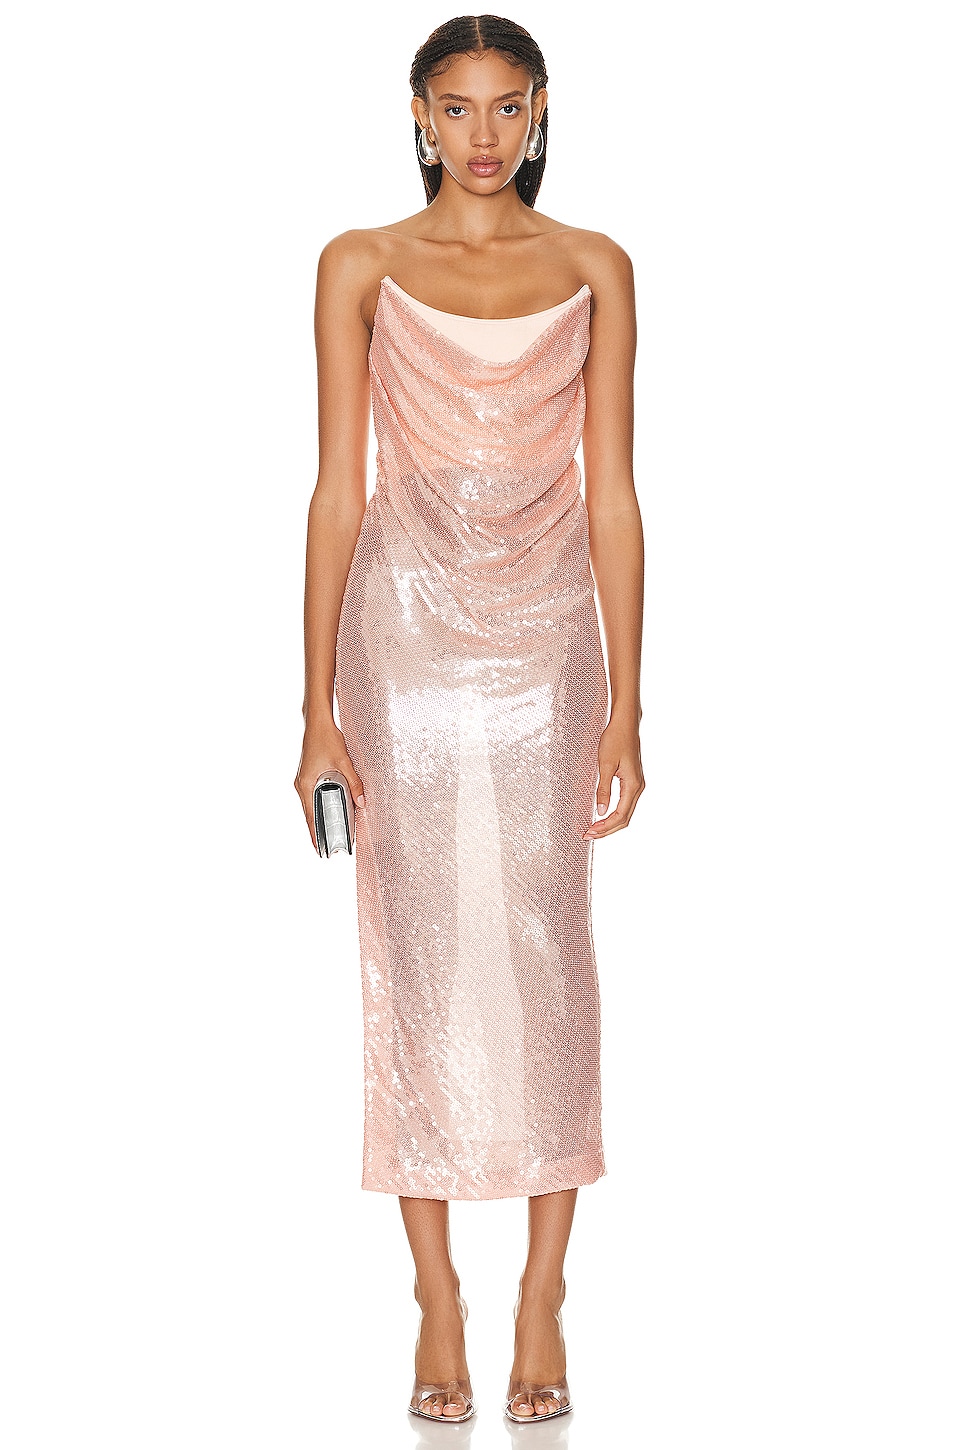 Image 1 of Alex Perry Sequin Layered Strapless Drape Dress in Peach